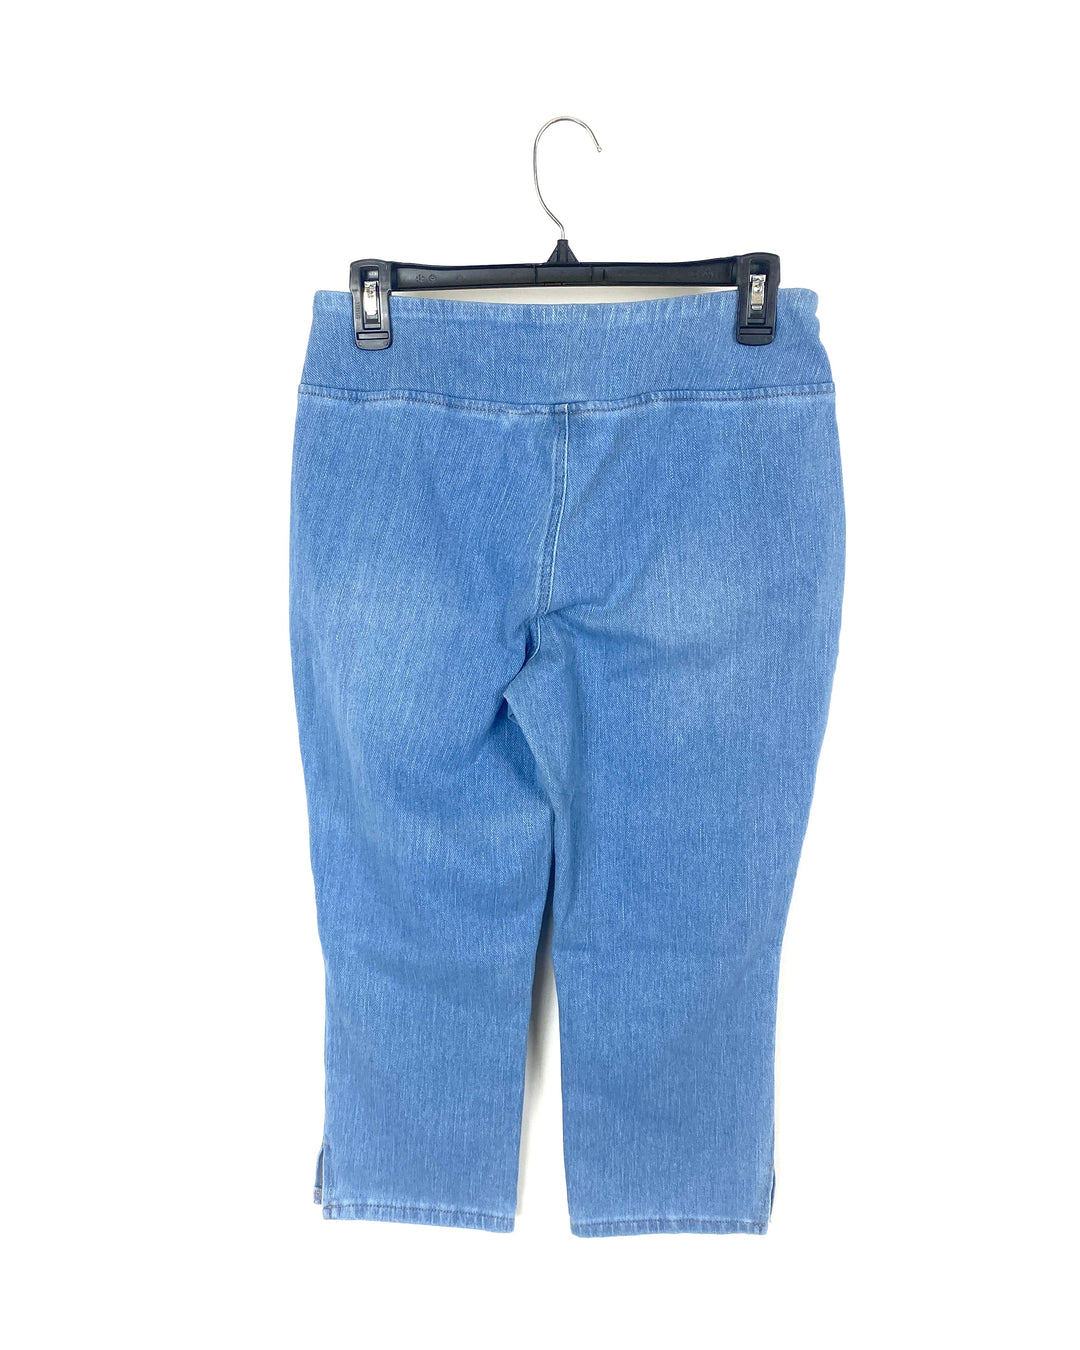 Light Blue Wash Jeans With Open Slit - Size 6/8